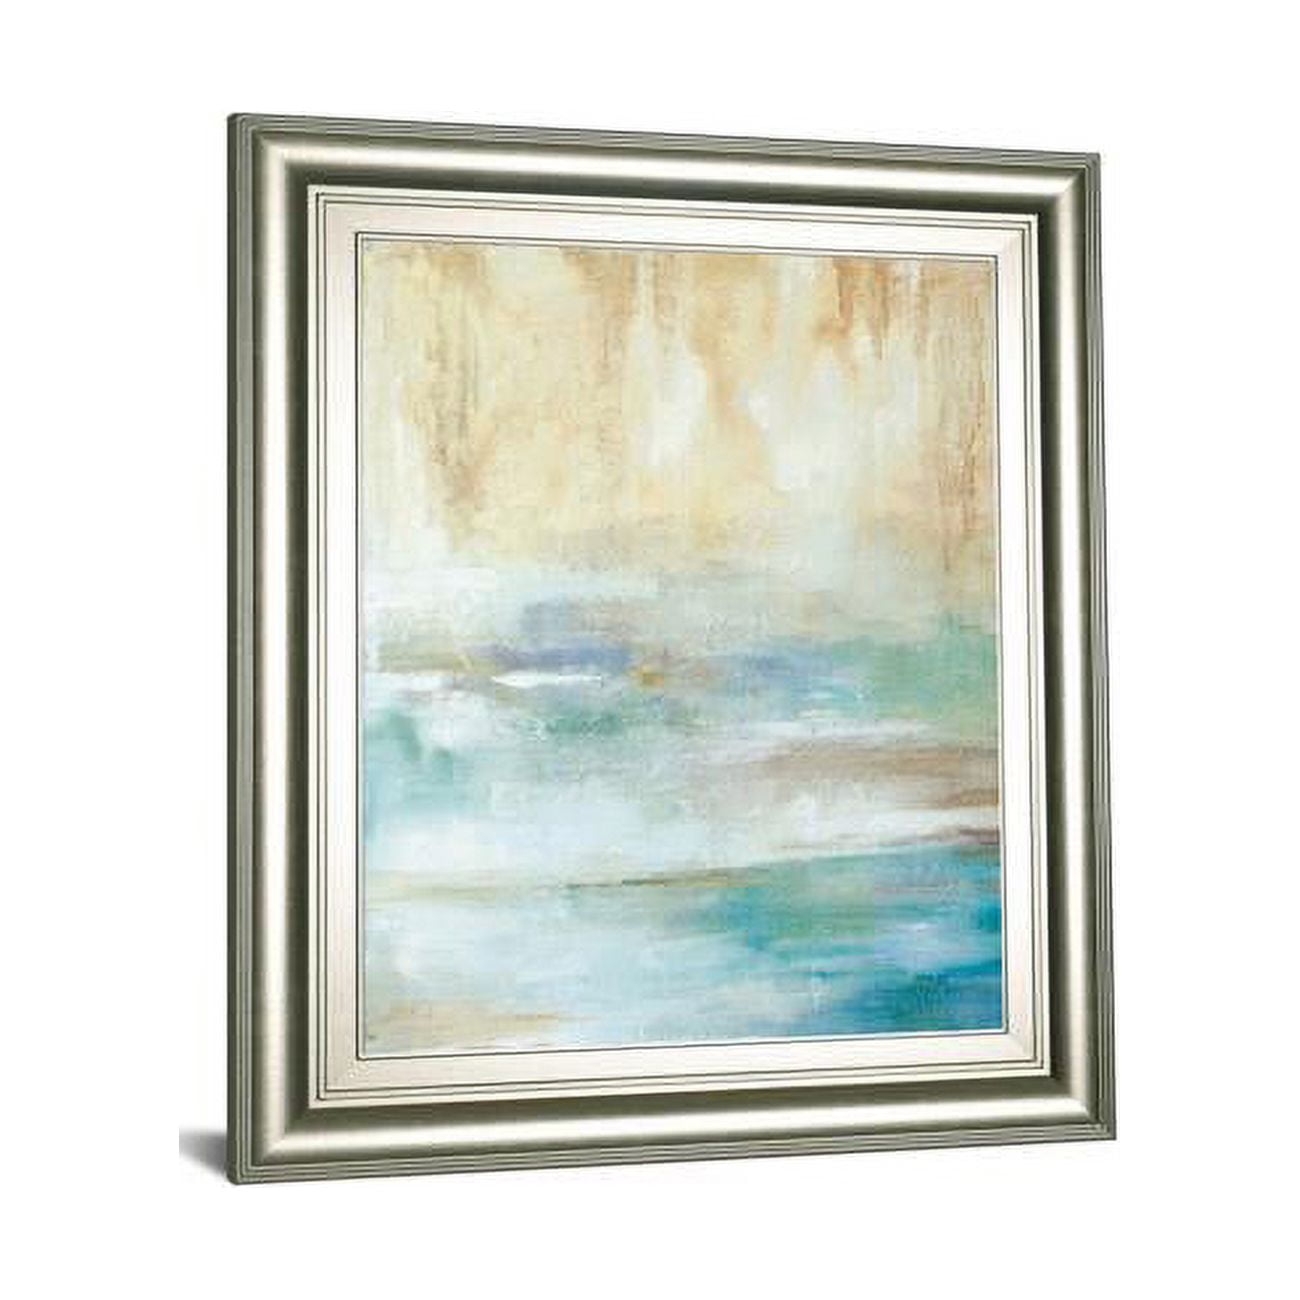 Picture of Classy Art 8442 22 x 26 in. Through The Mist I by Carol Robinson Framed Print Wall Art